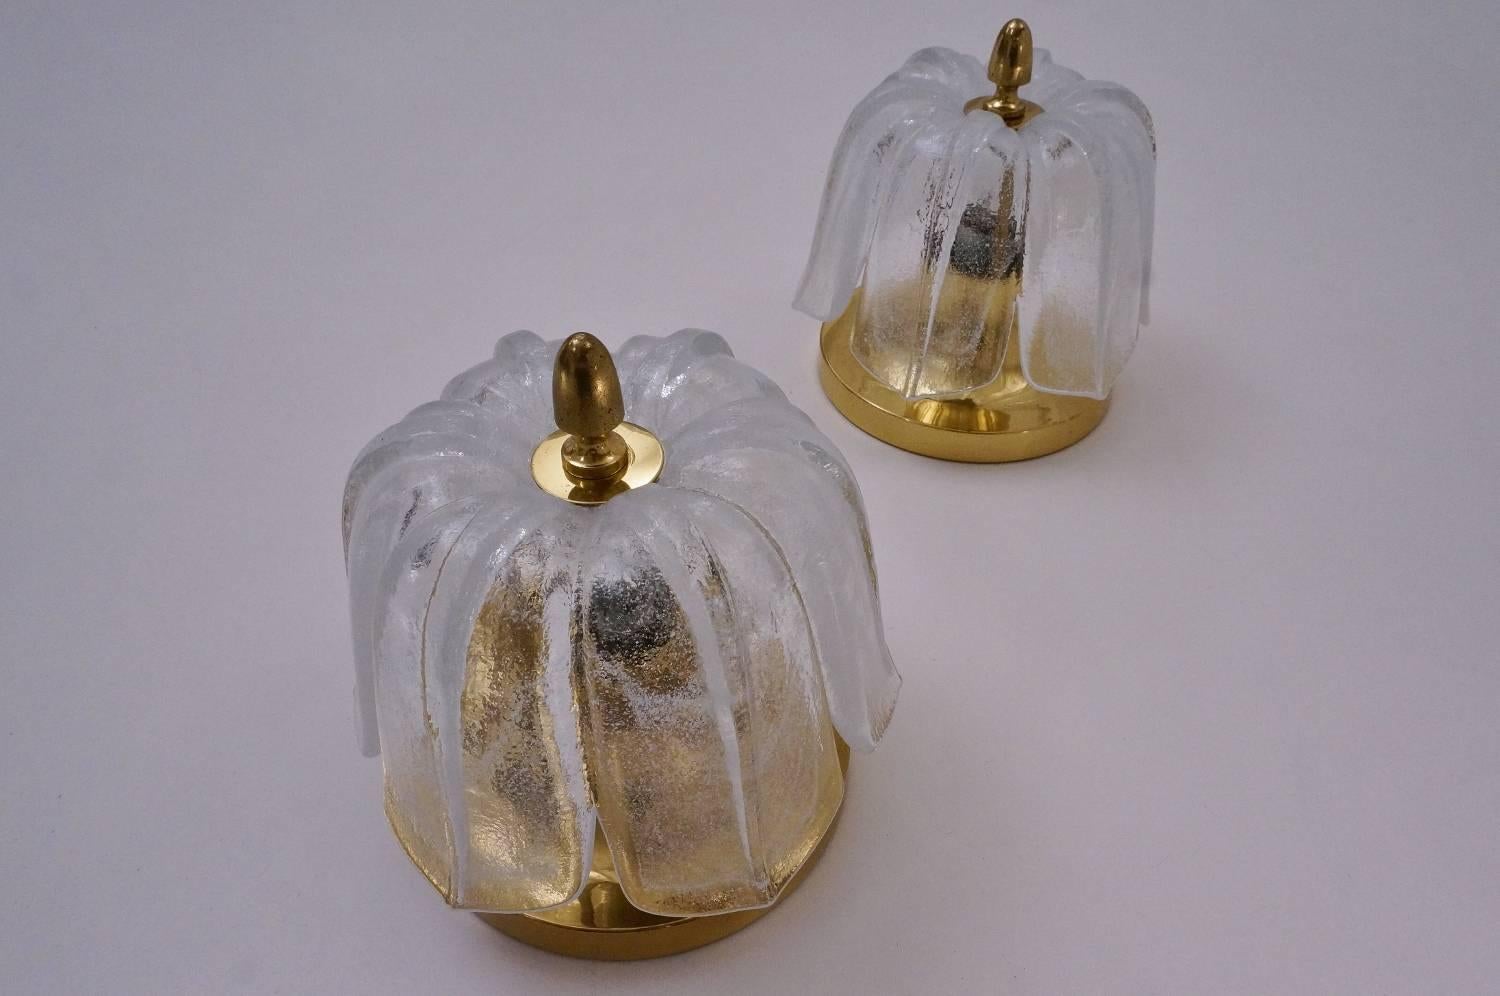 Limburg glass pair of wall lights, tulip shaped shade on a brass base, circa 1970s, German.

Both lights have been thoroughly cleaned respecting the vintage patina; newly rewired & earthed, in full working order & ready to install. Light